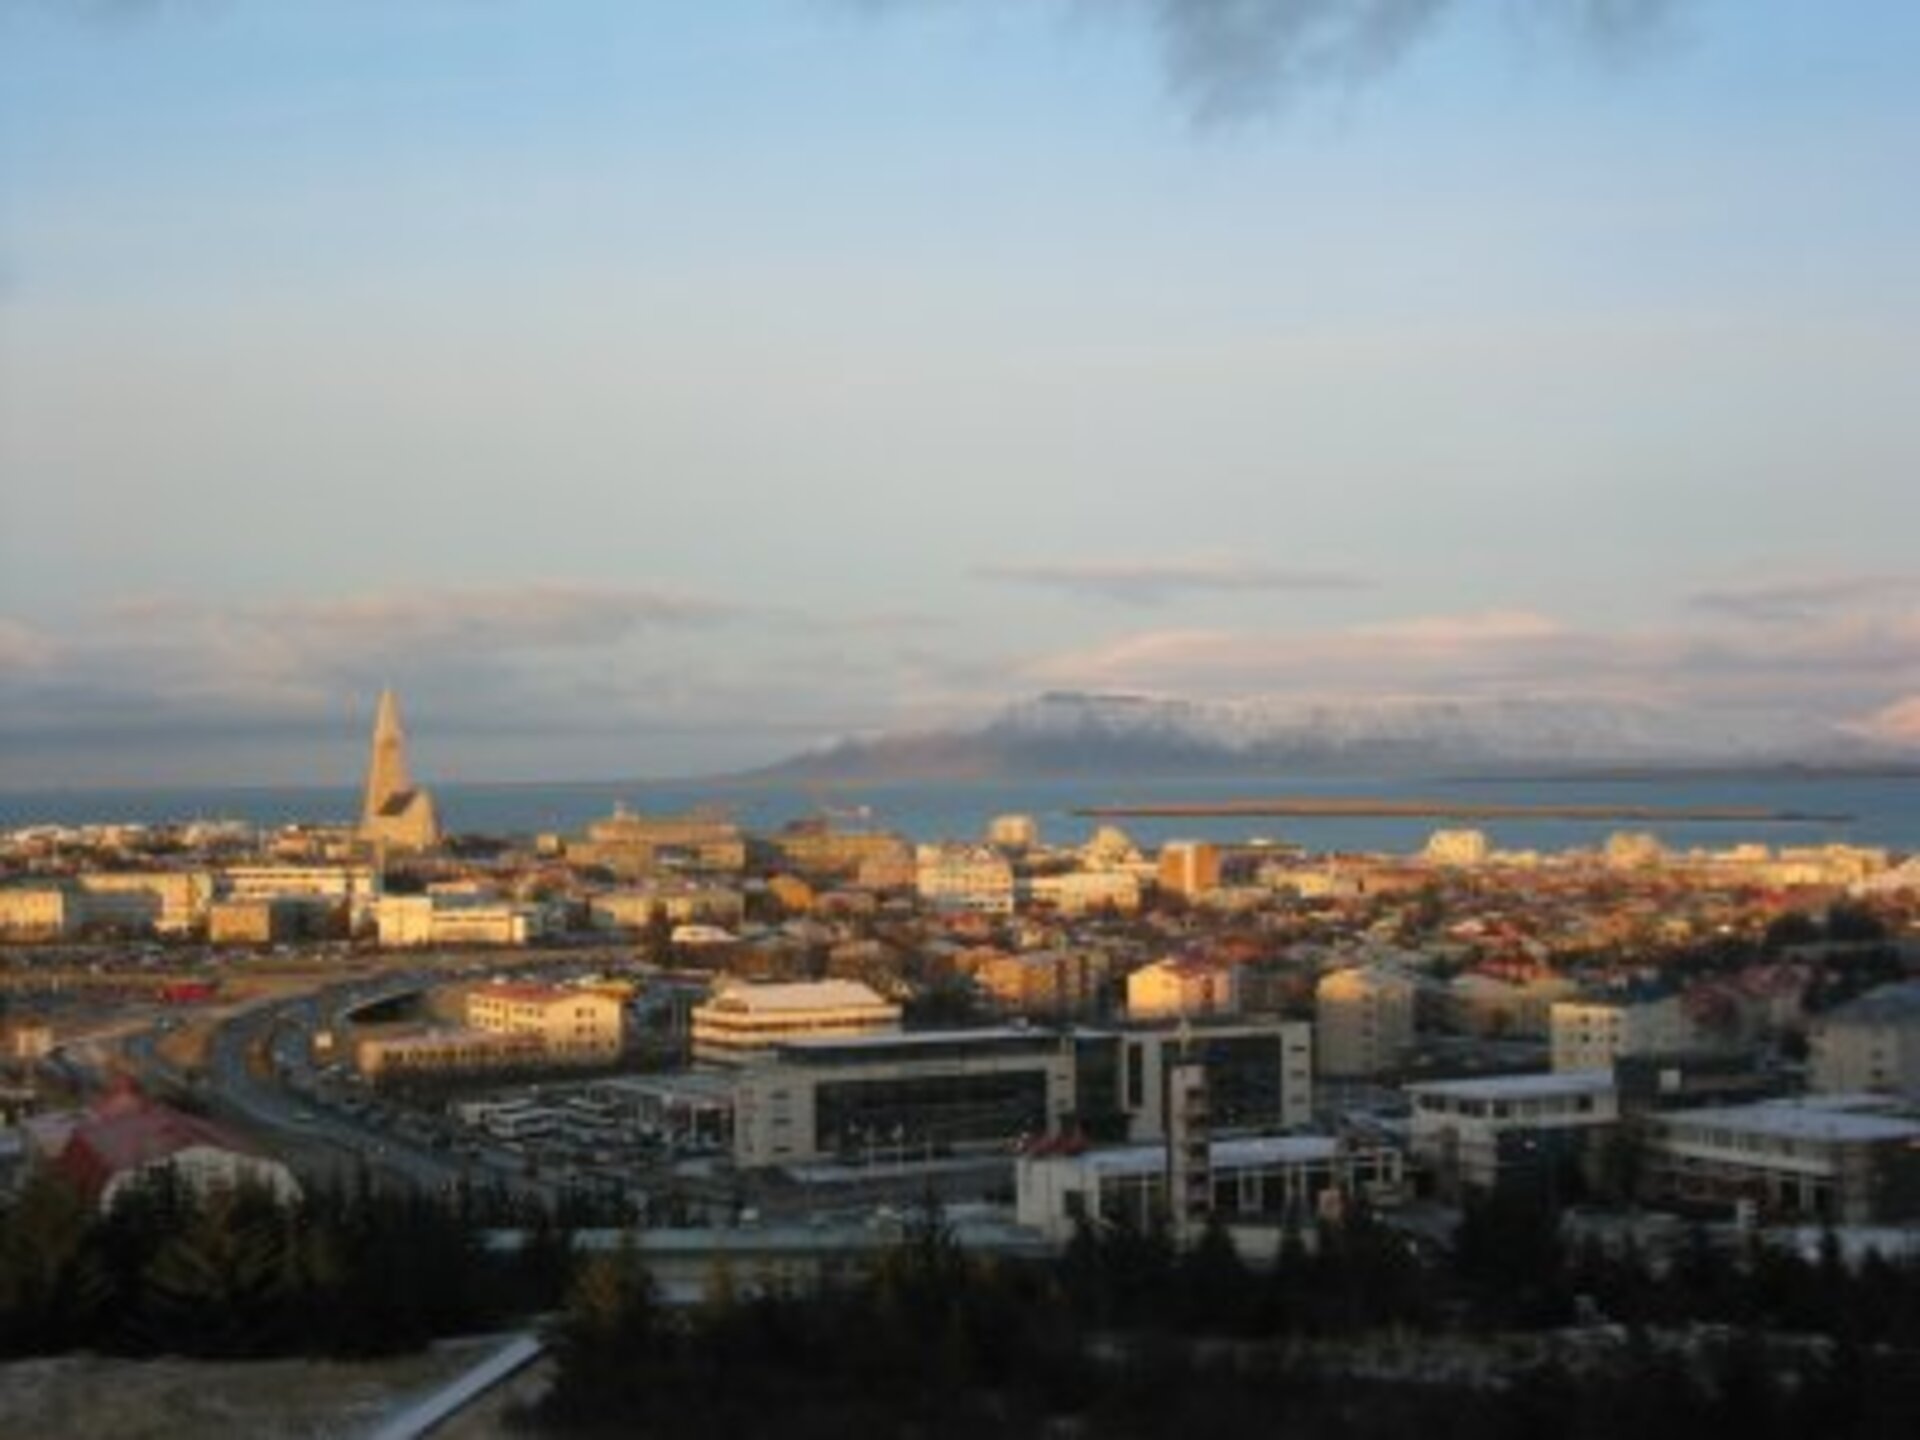 A new ground station is located in Reykjavik